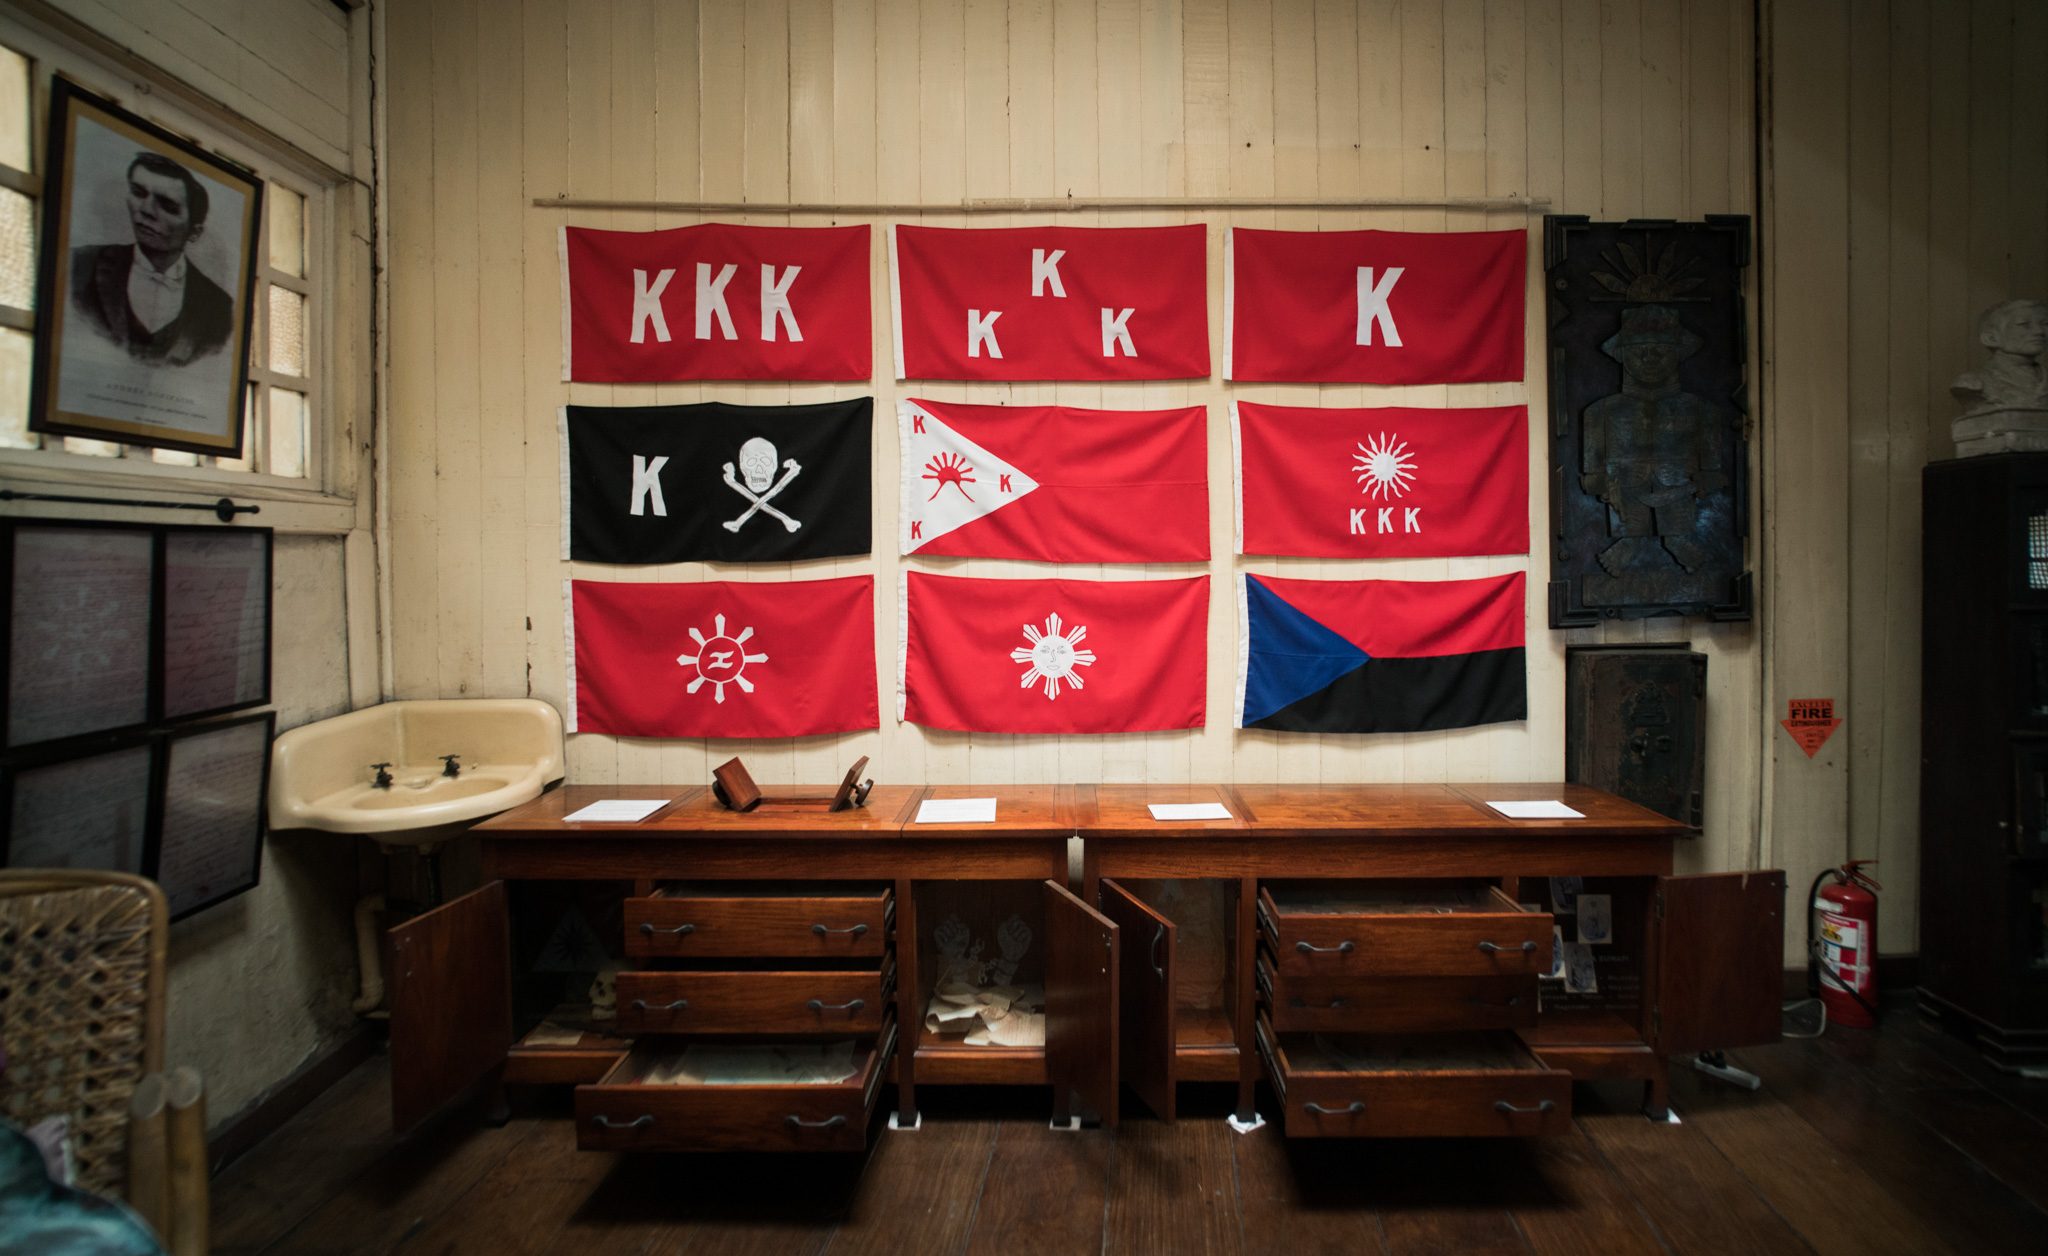 KATIPUNAN. The flags of the Katipunan hang in one of Bahay Nakpil's rooms, in memory of its former residents who were among the movement's more prominent members. Photo by Martin San Diego/Rappler 